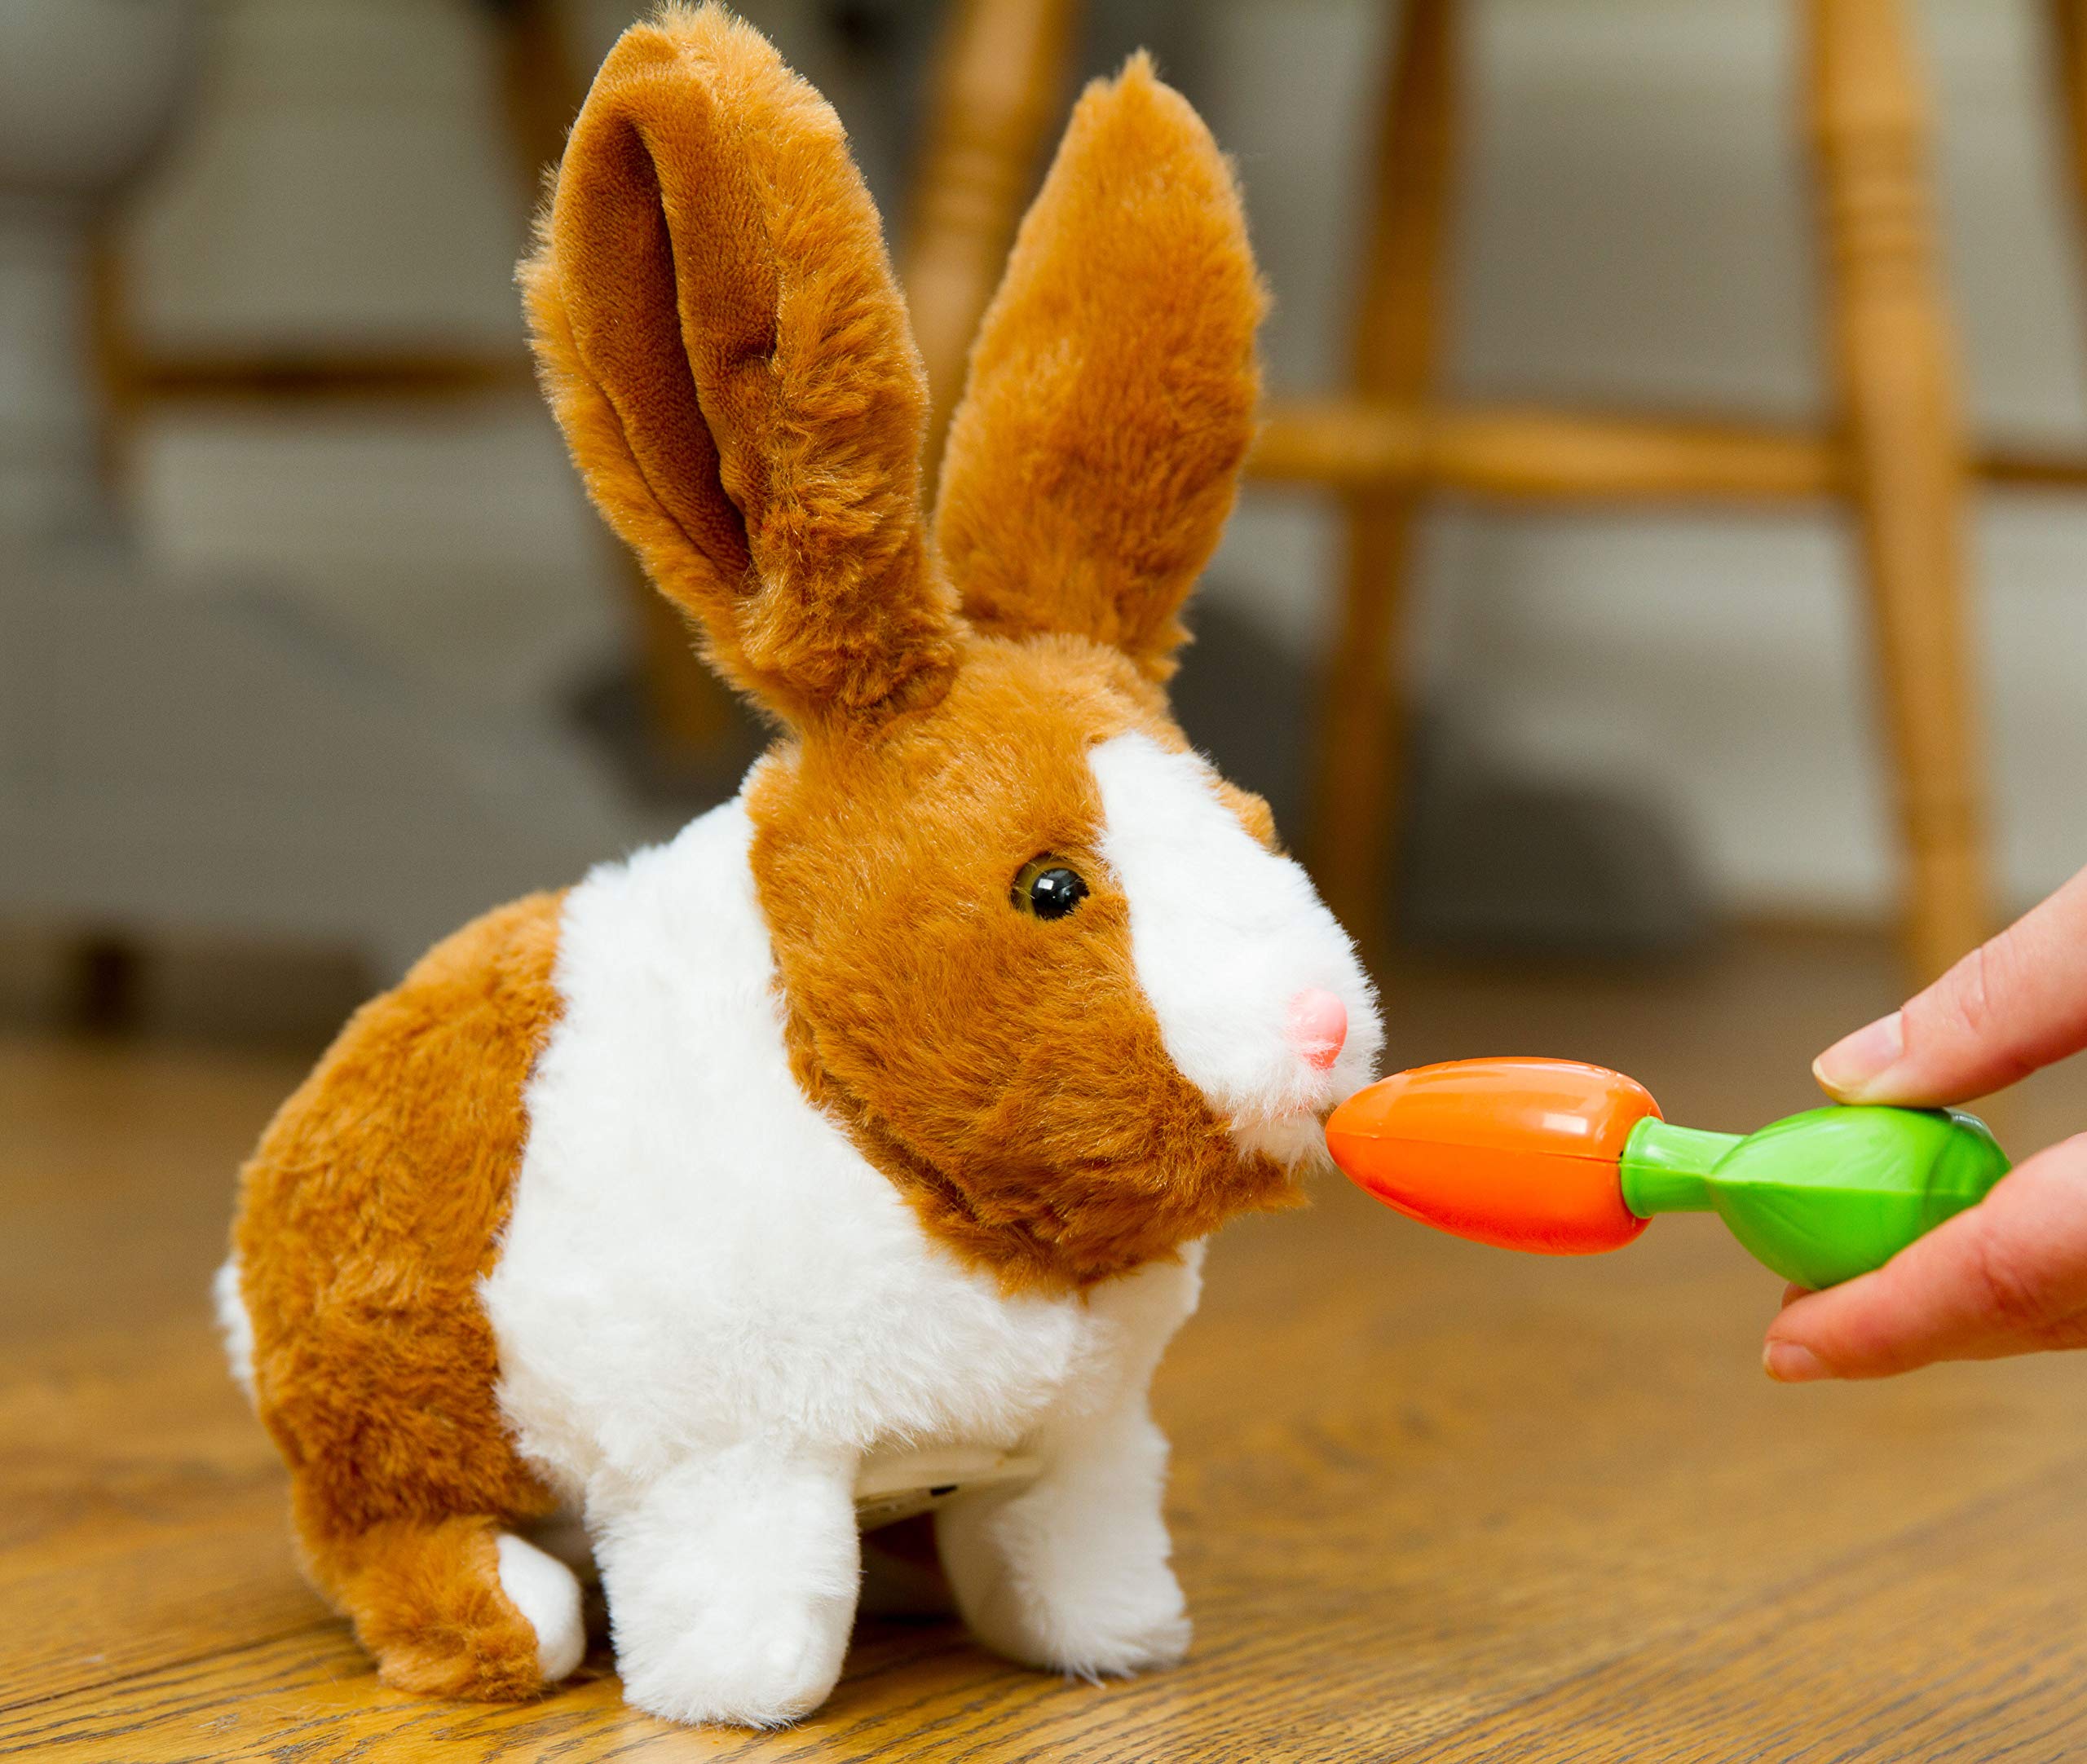 Think Gizmos Plush Rabbit Pet Toy – Cuddle Soft, Furry, Interactive Toy Animal, Hops Around Plus Comes with Pretend Play Carrot